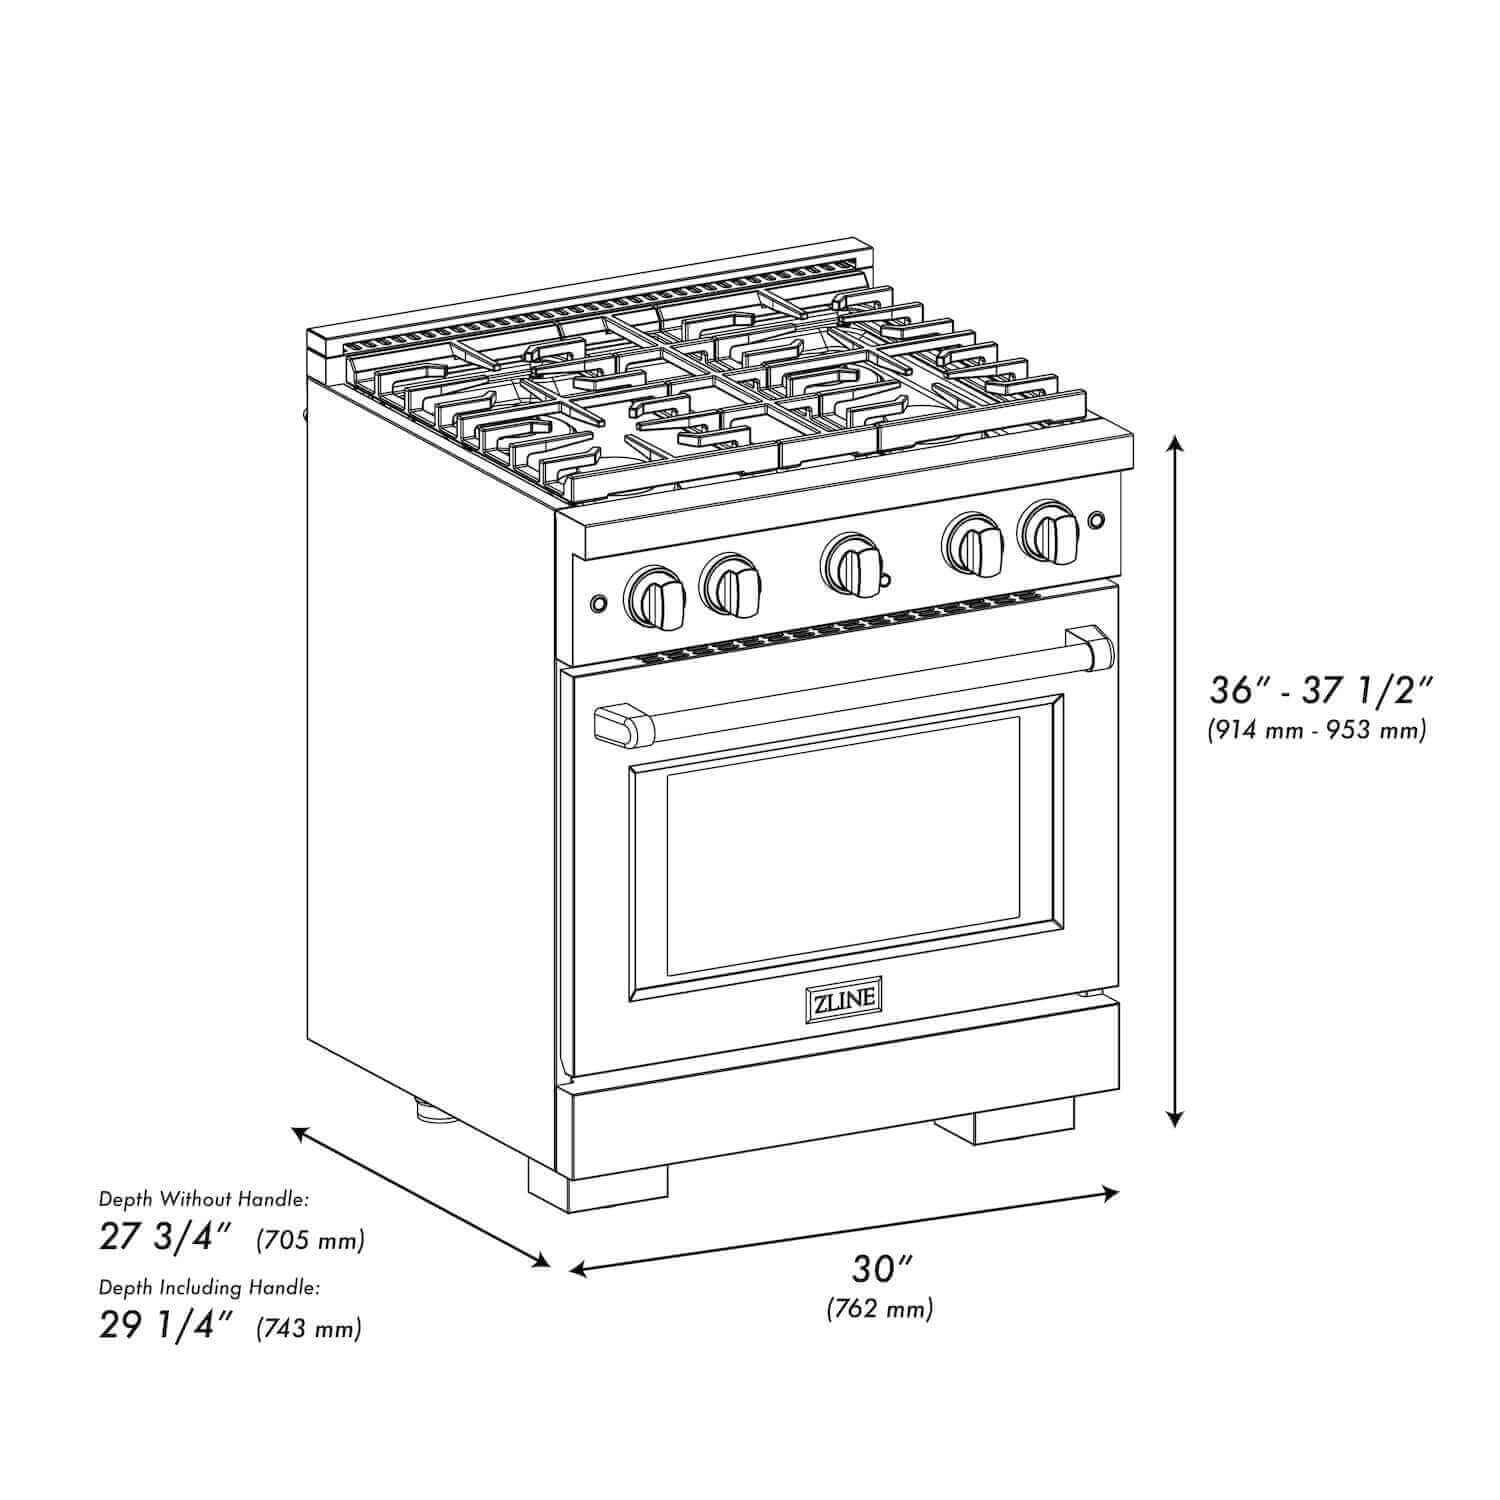 ZLINE 30" Stainless Steel Gas Range (SGR30) measurements and dimensions.